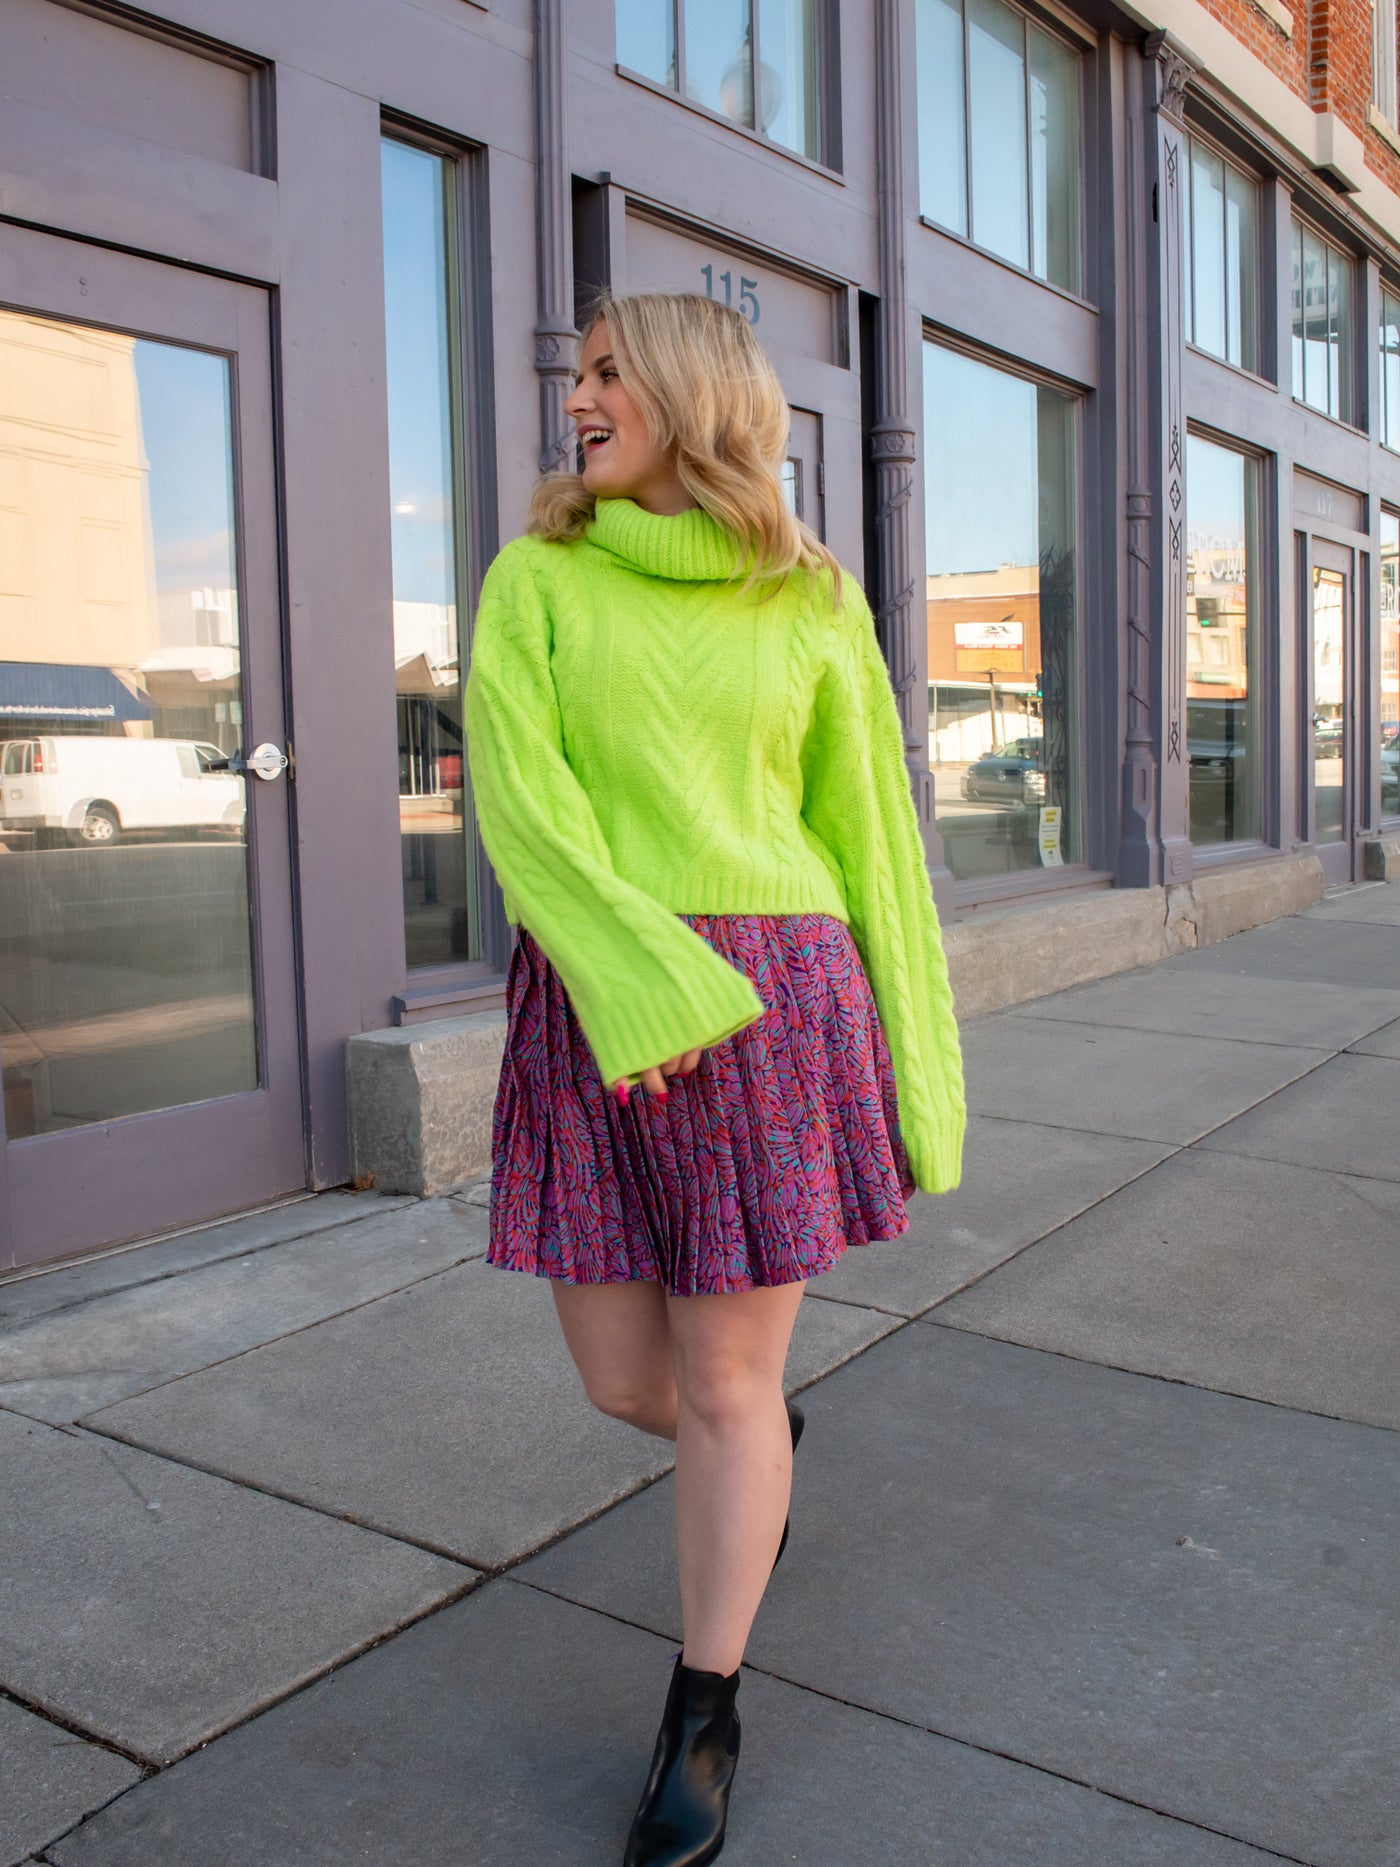 A model wearing a purple printed pleated skirt with a lime green sweater.